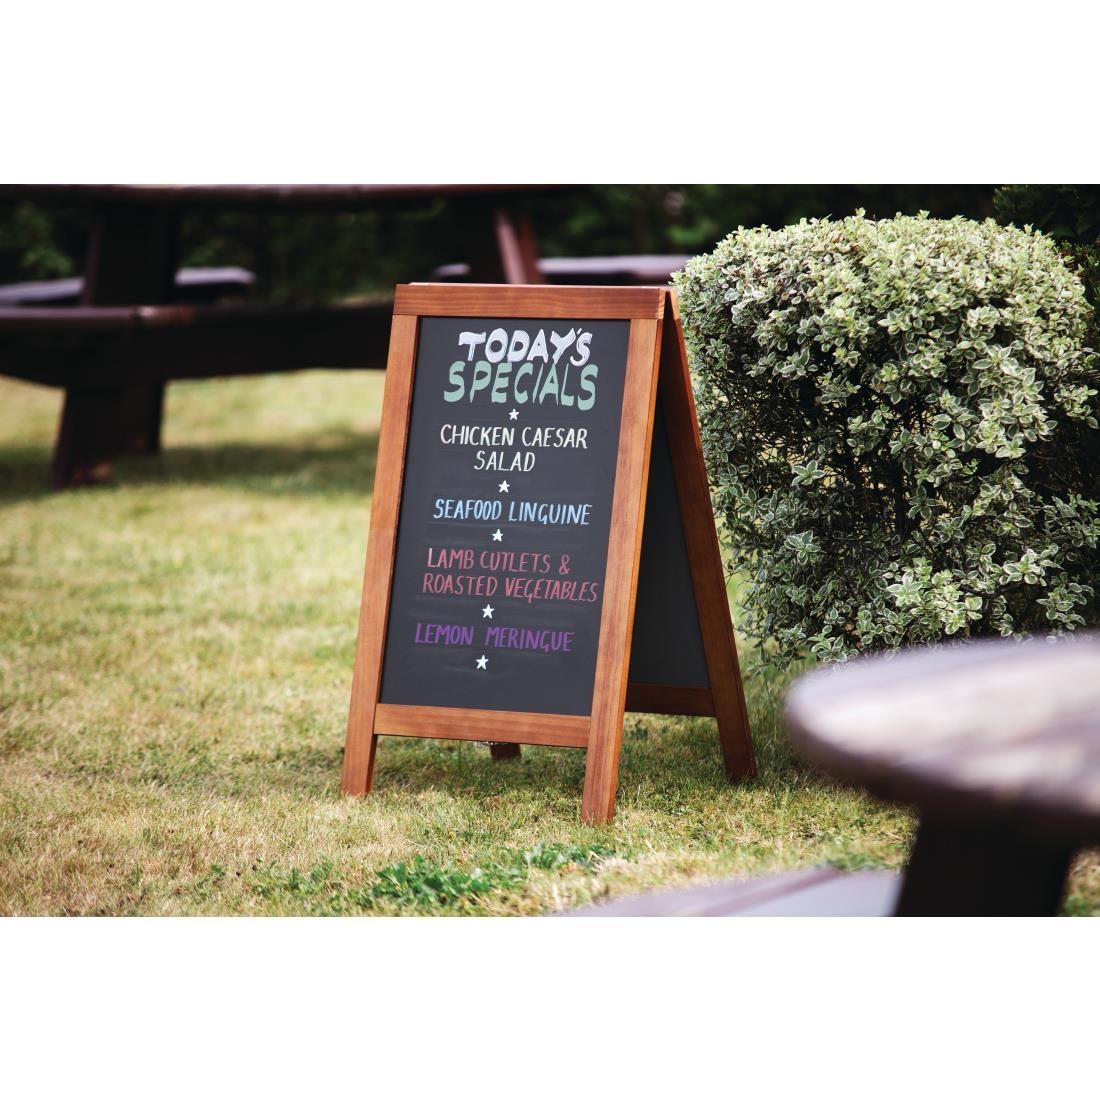 Olympia Pavement Board 1200 x 700mm Wood Framed - GG109  - 9